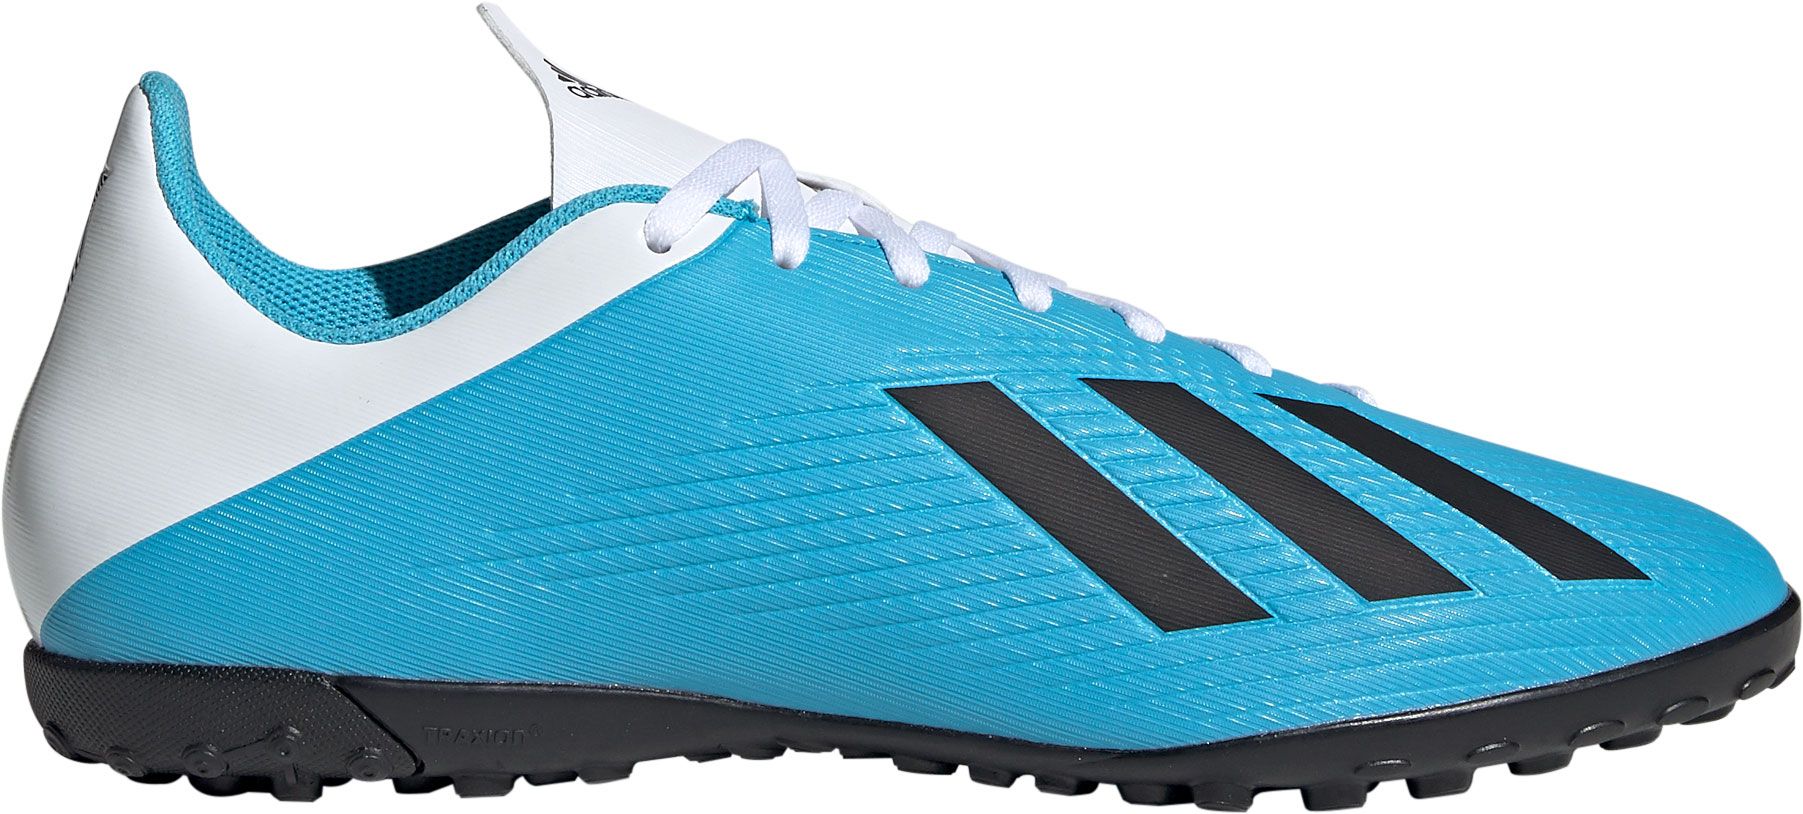 adidas blue and white soccer cleats